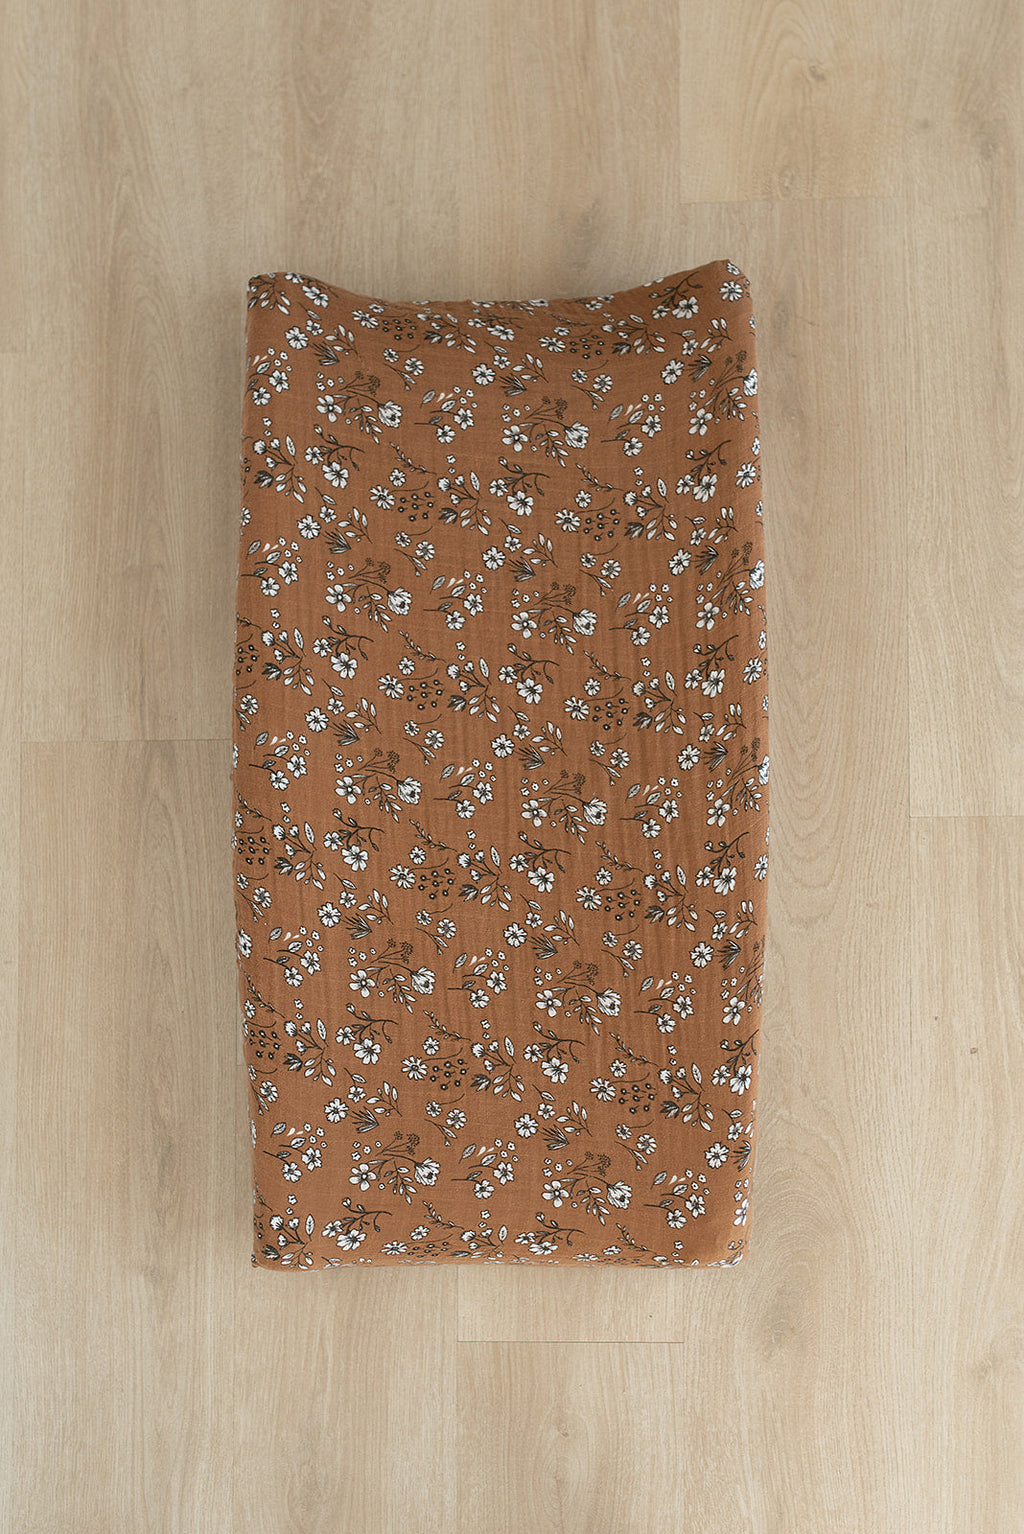 Vintage Floral Changing Pad Cover